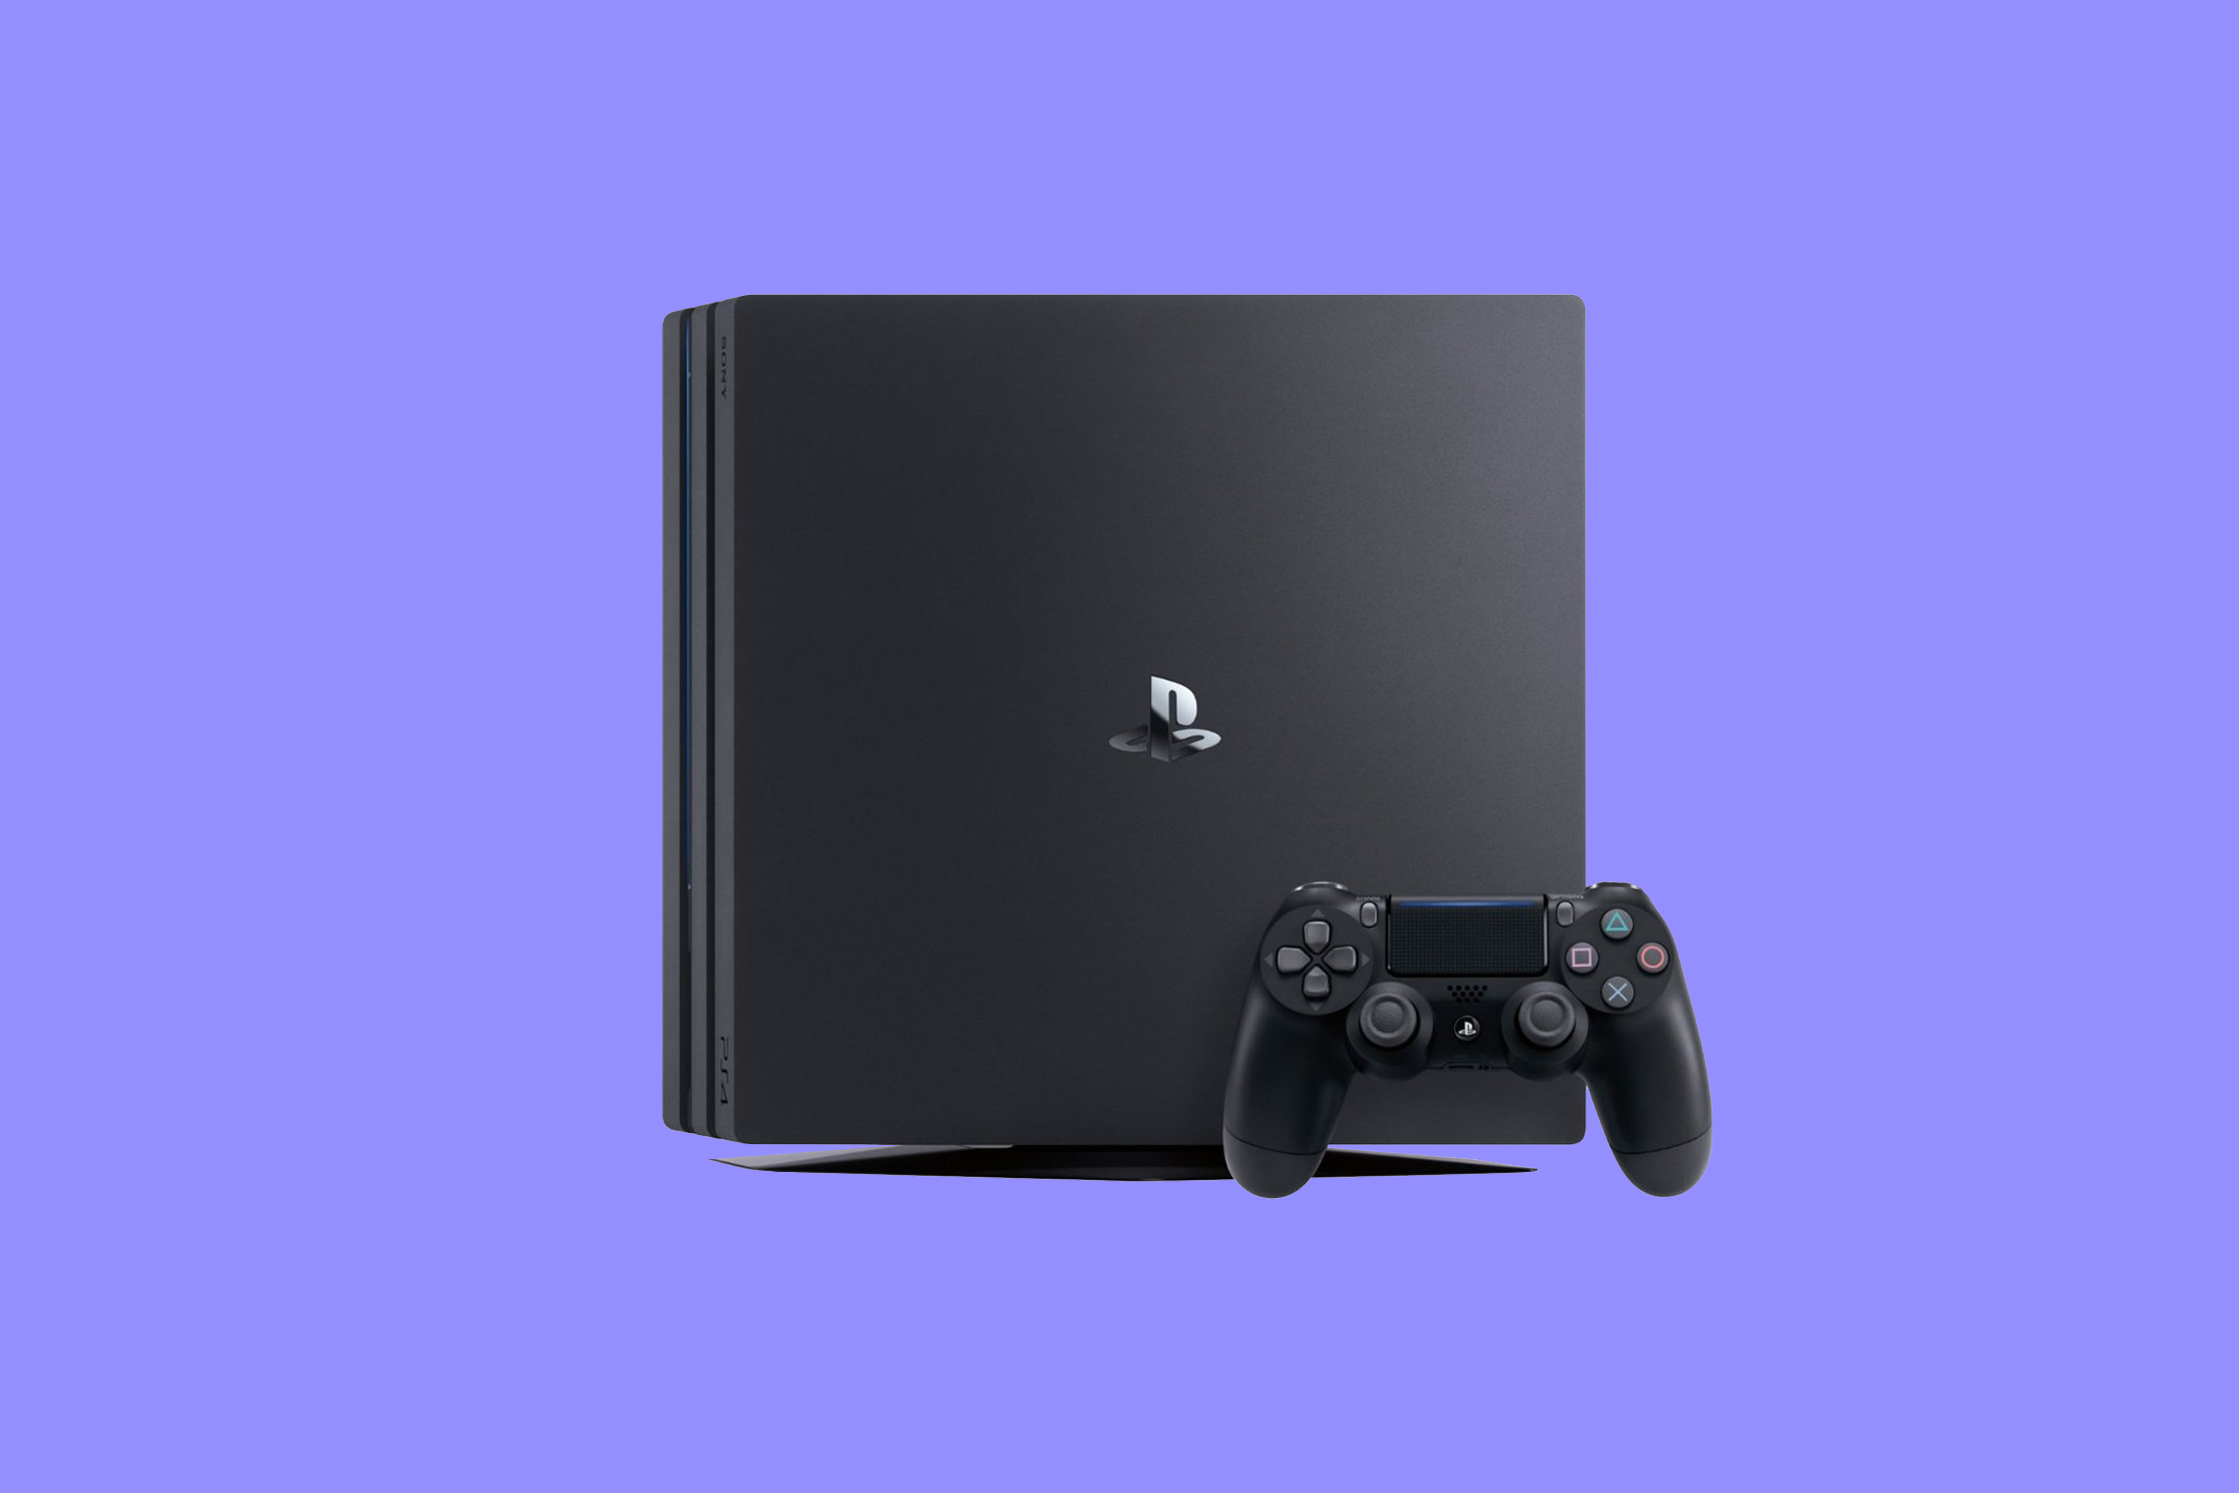 Cyber Monday 2019: The best Cyber Monday PS4 and PS4 Pro deals